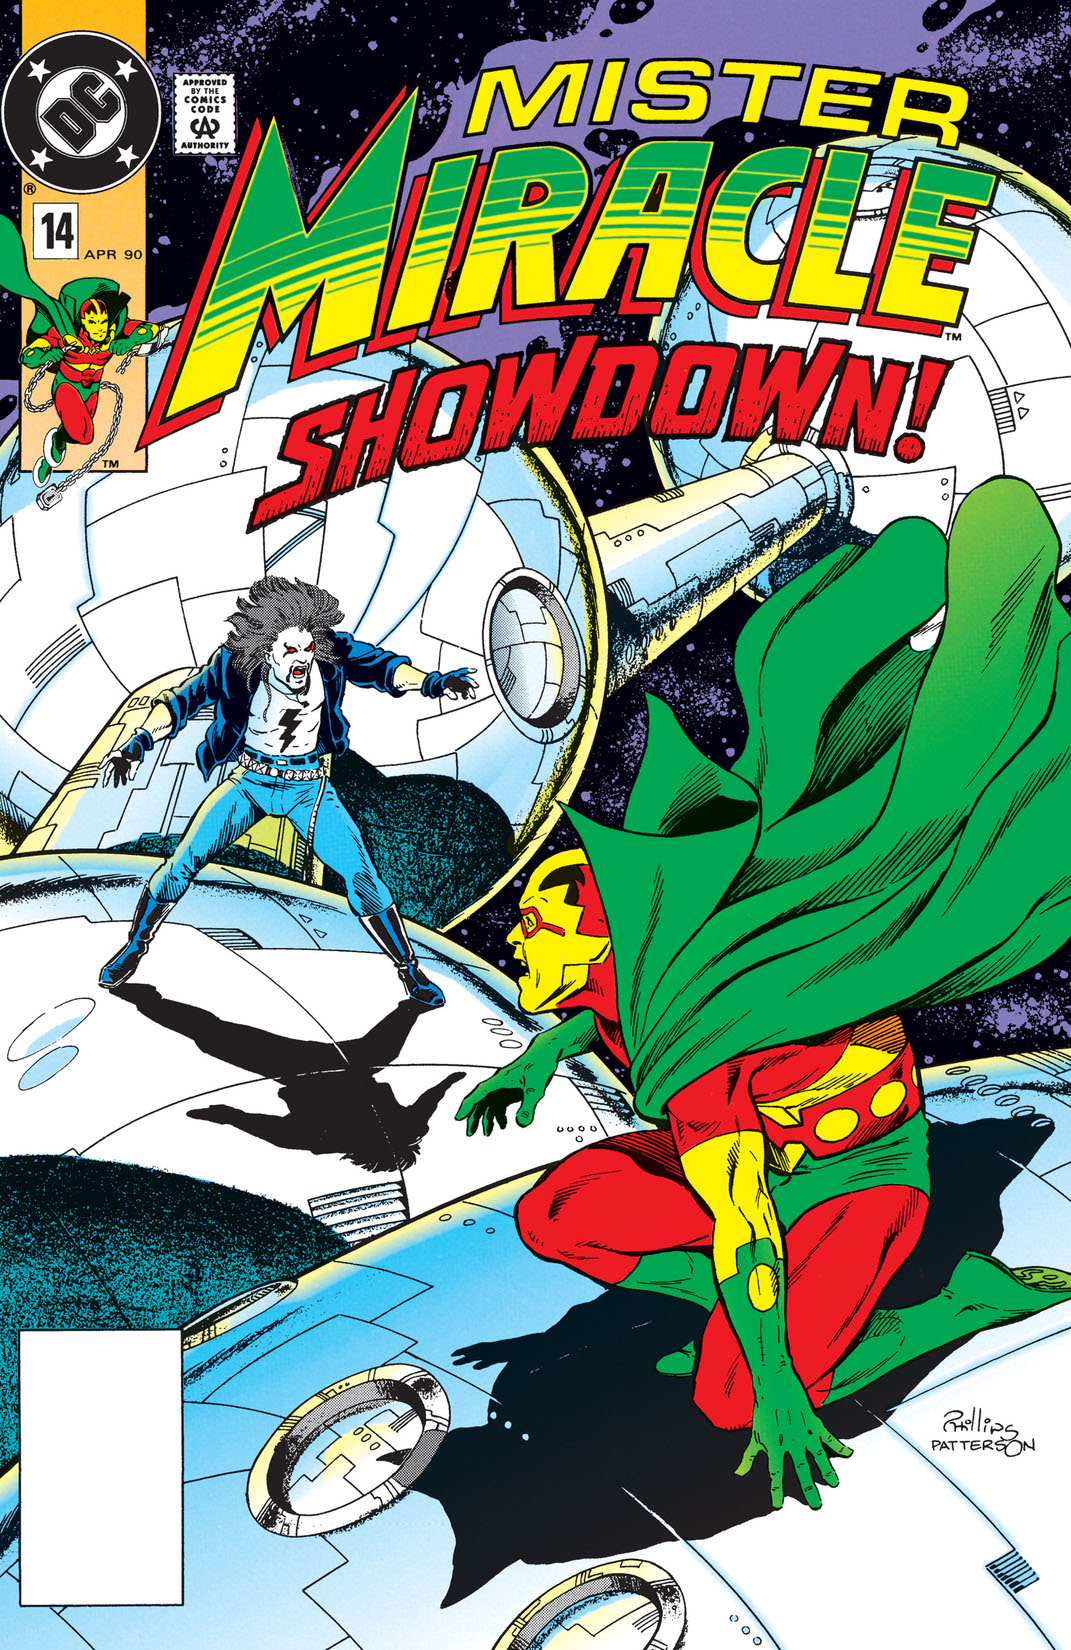 Mister Miracle (1988-) #14 preview images